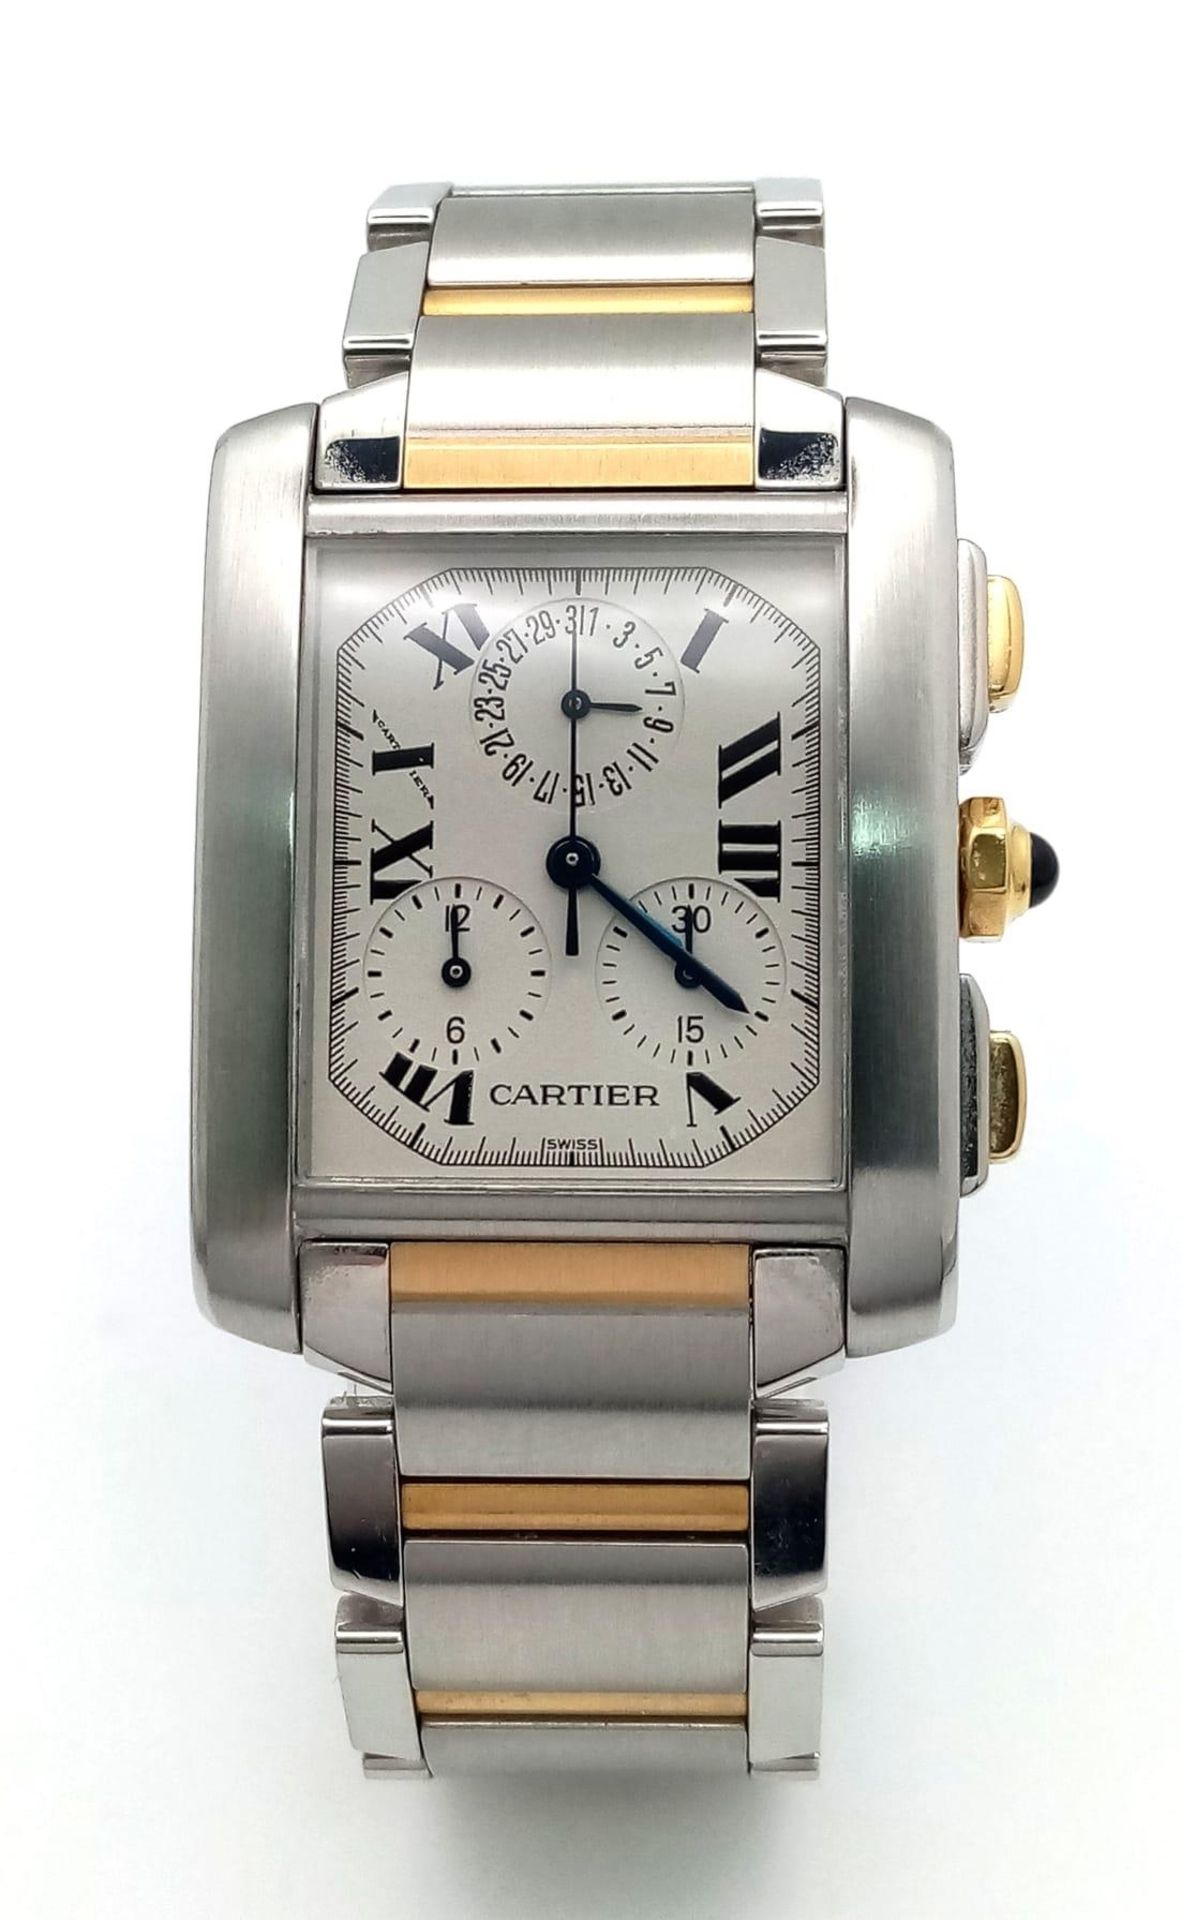 A Cartier Tank Francaise Bi-Metal Quartz Chronograph Gents Watch. 18k gold and stainless steel